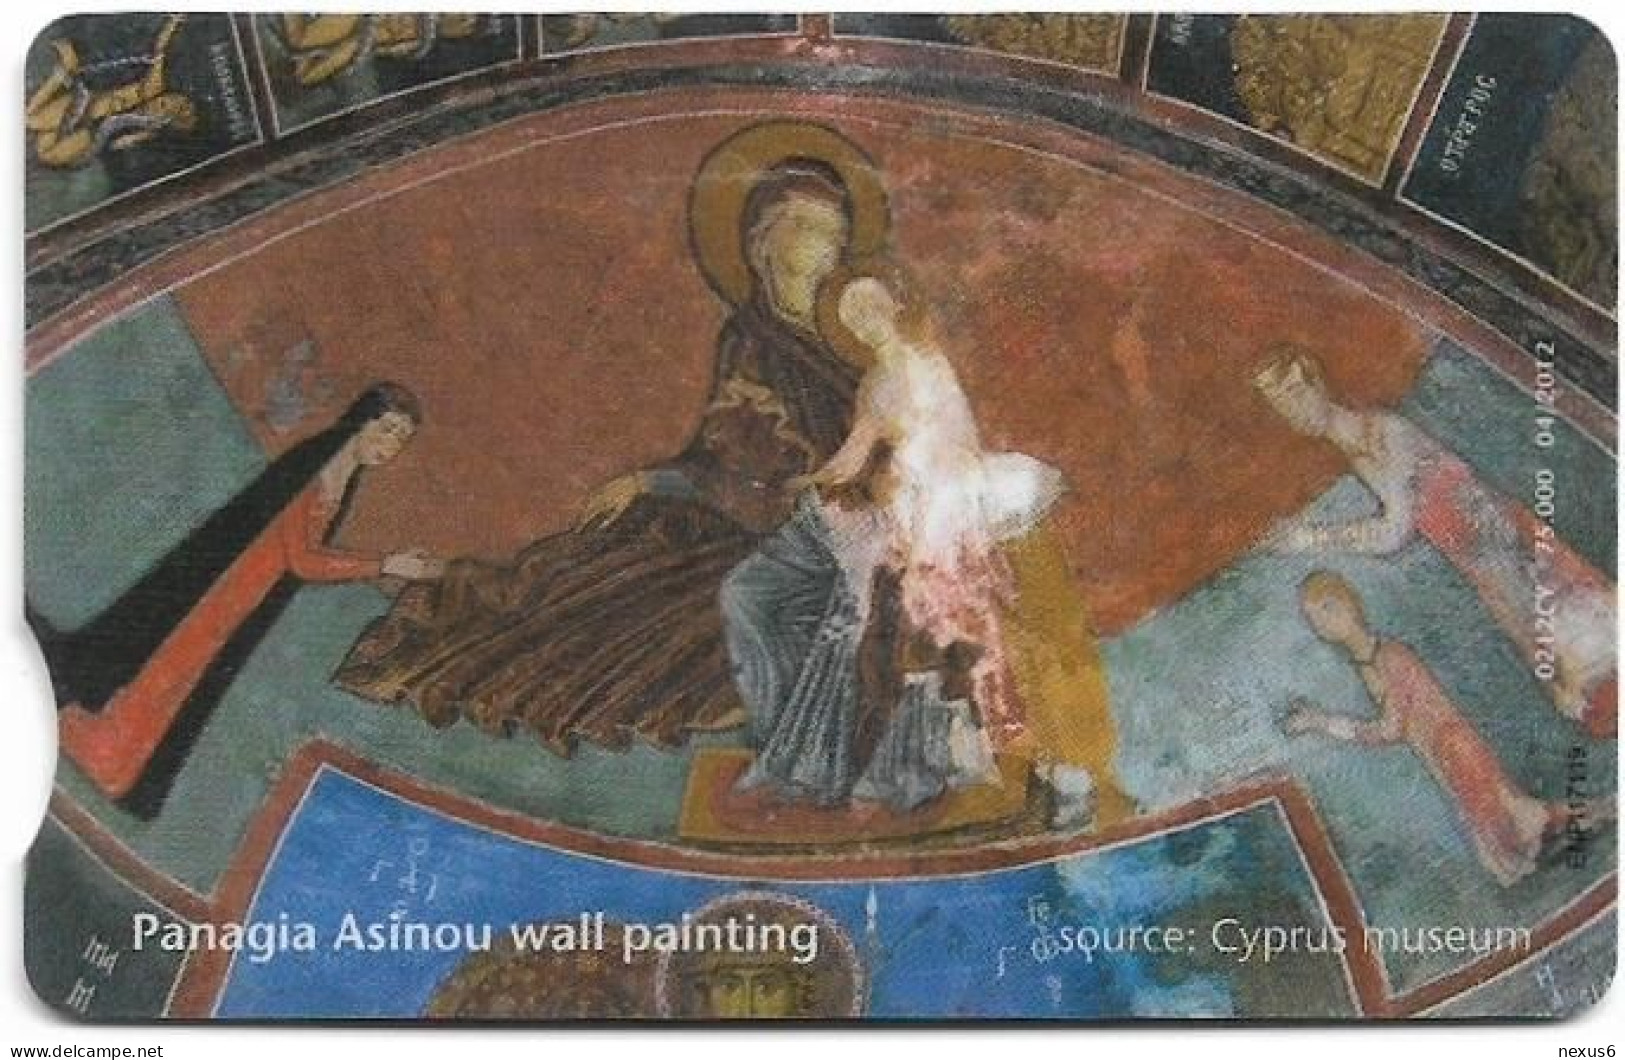 Cyprus - Cyta (Chip) - Unesco Heritage - Ancient Church In Asinou, 04.2012, 5€, 75.000ex, Used - Chypre